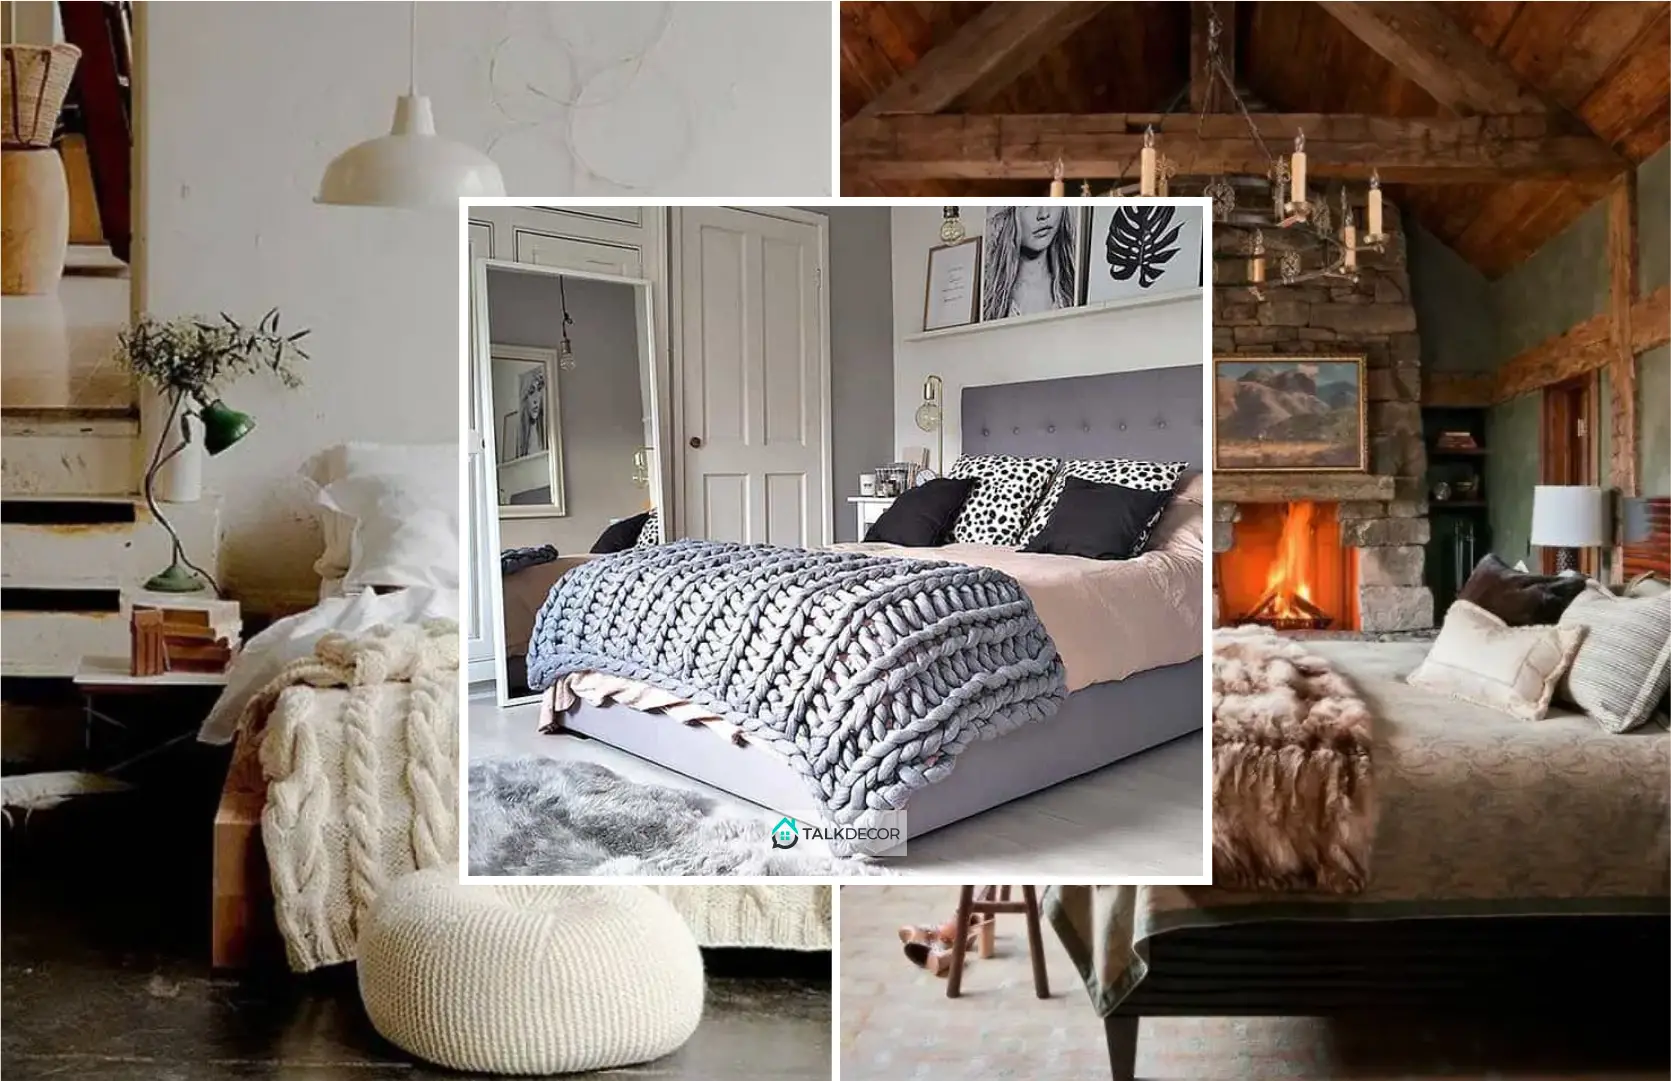 How to Create a Warm Decoration for Your Bedroom During Winter